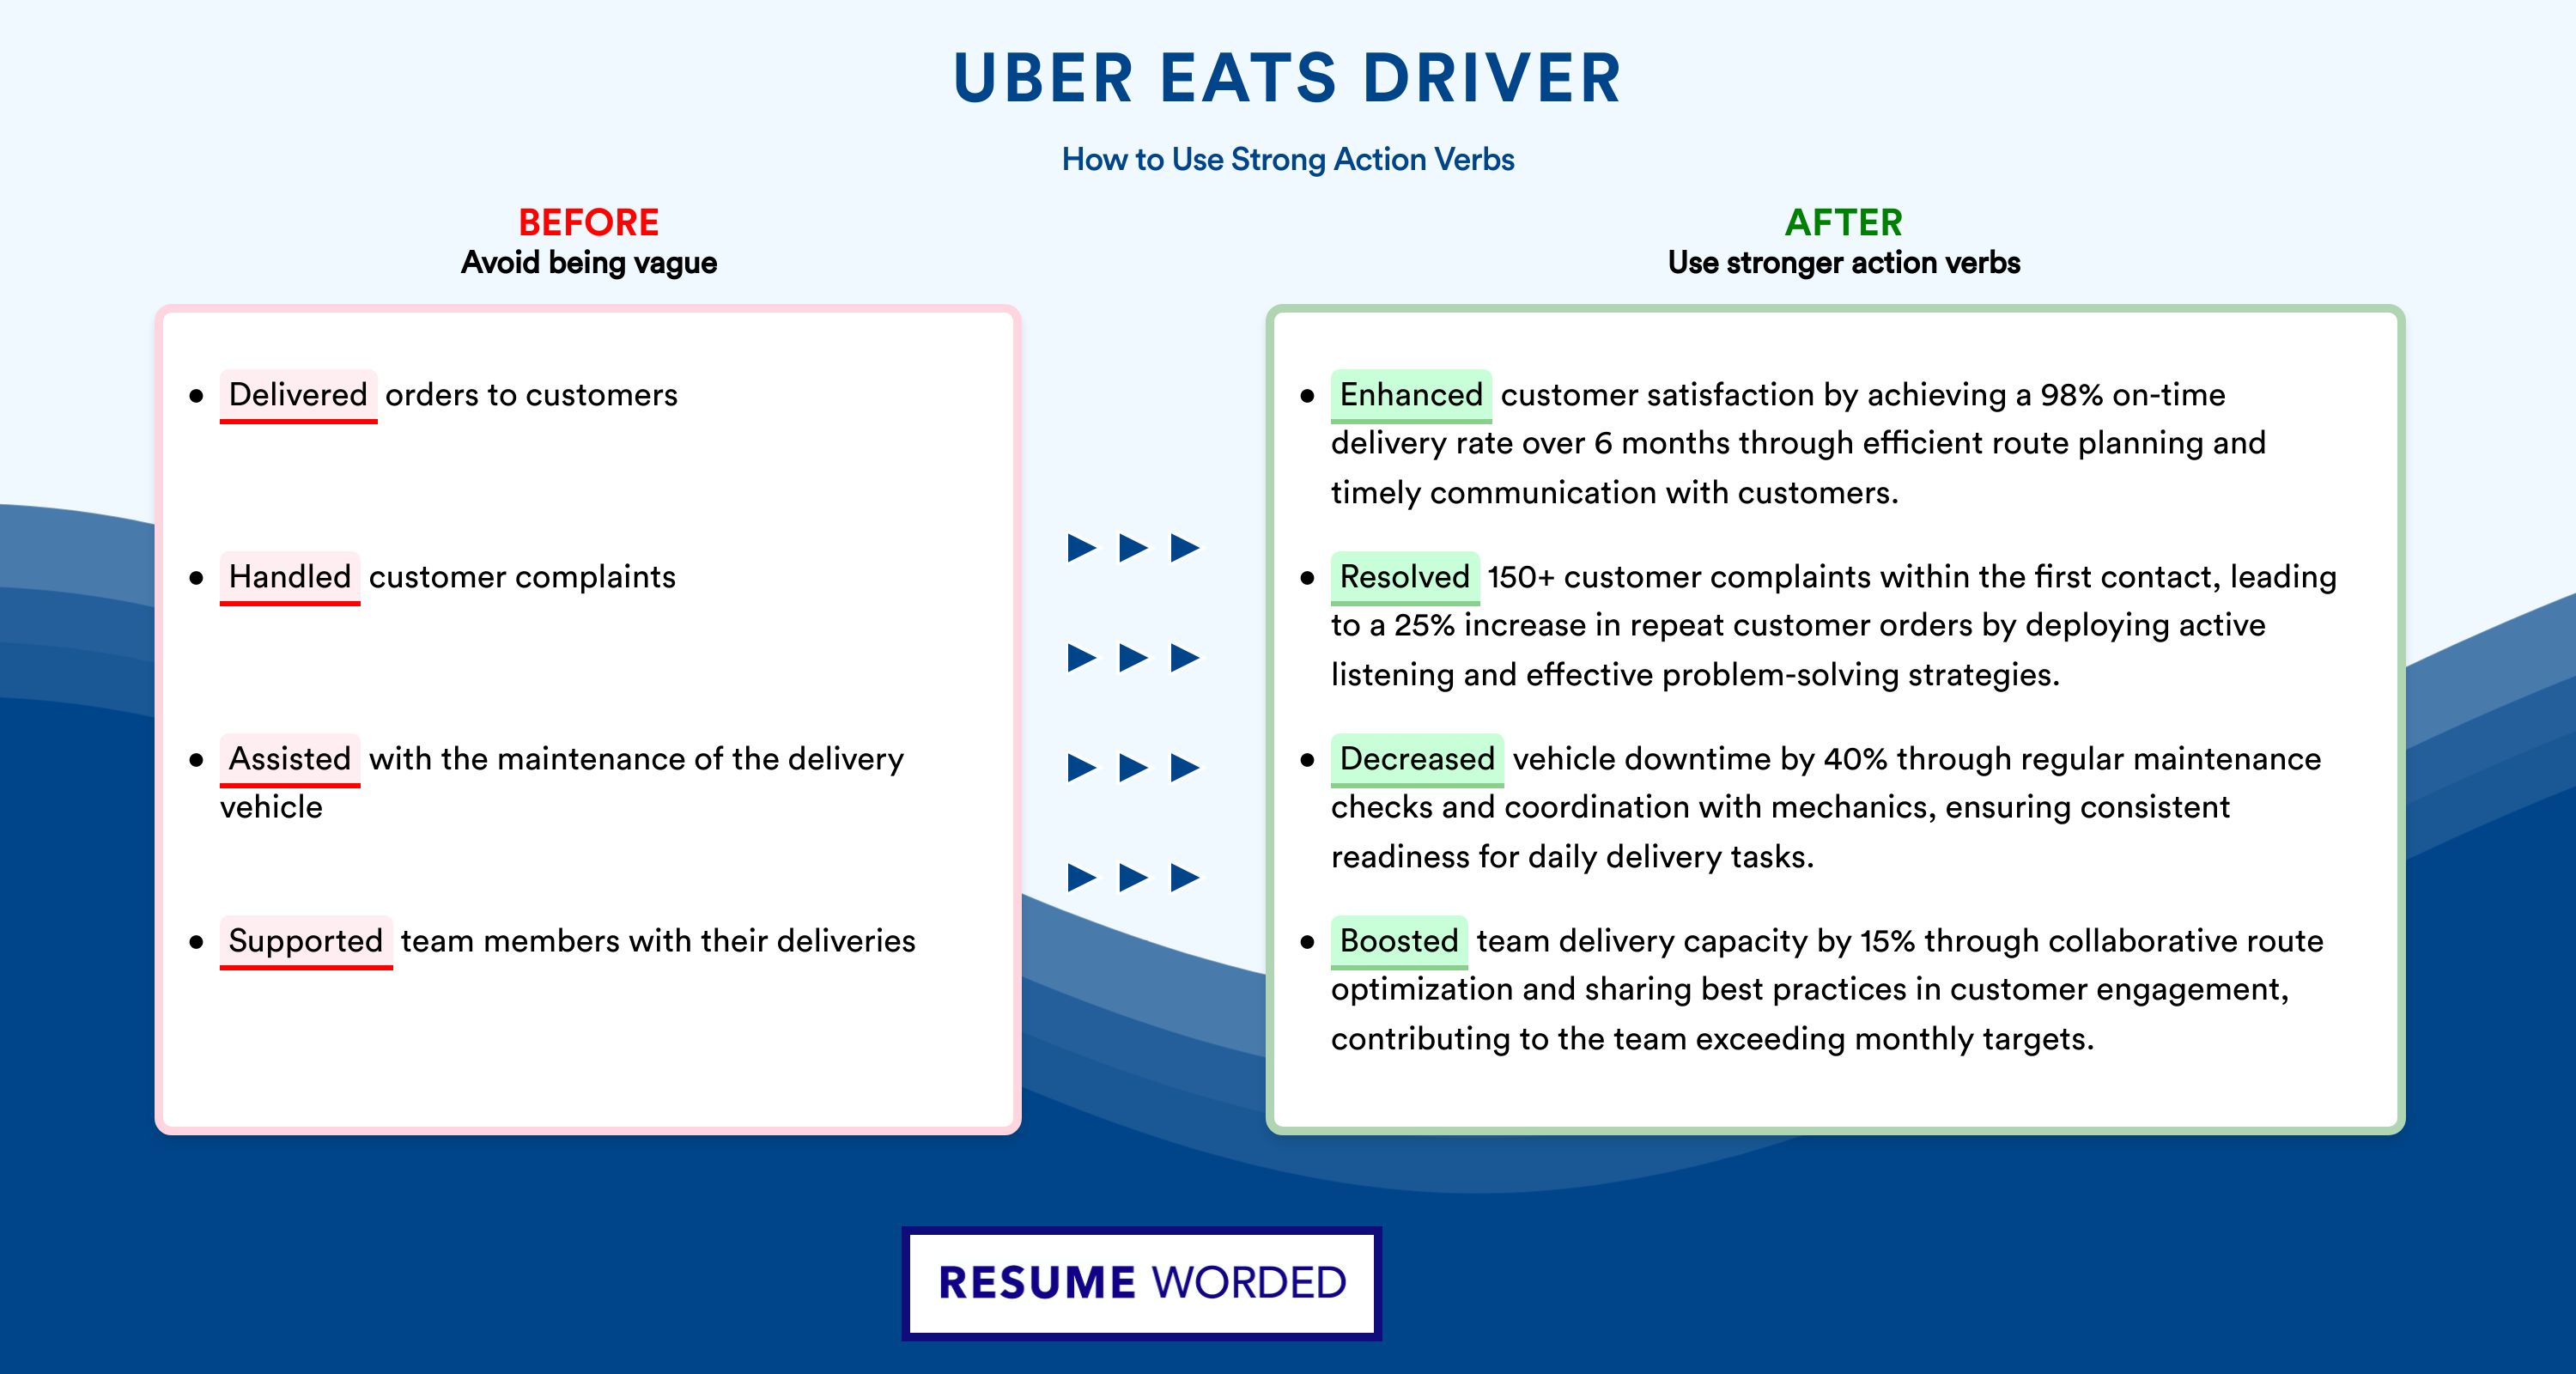 Action Verbs for Uber Eats Driver